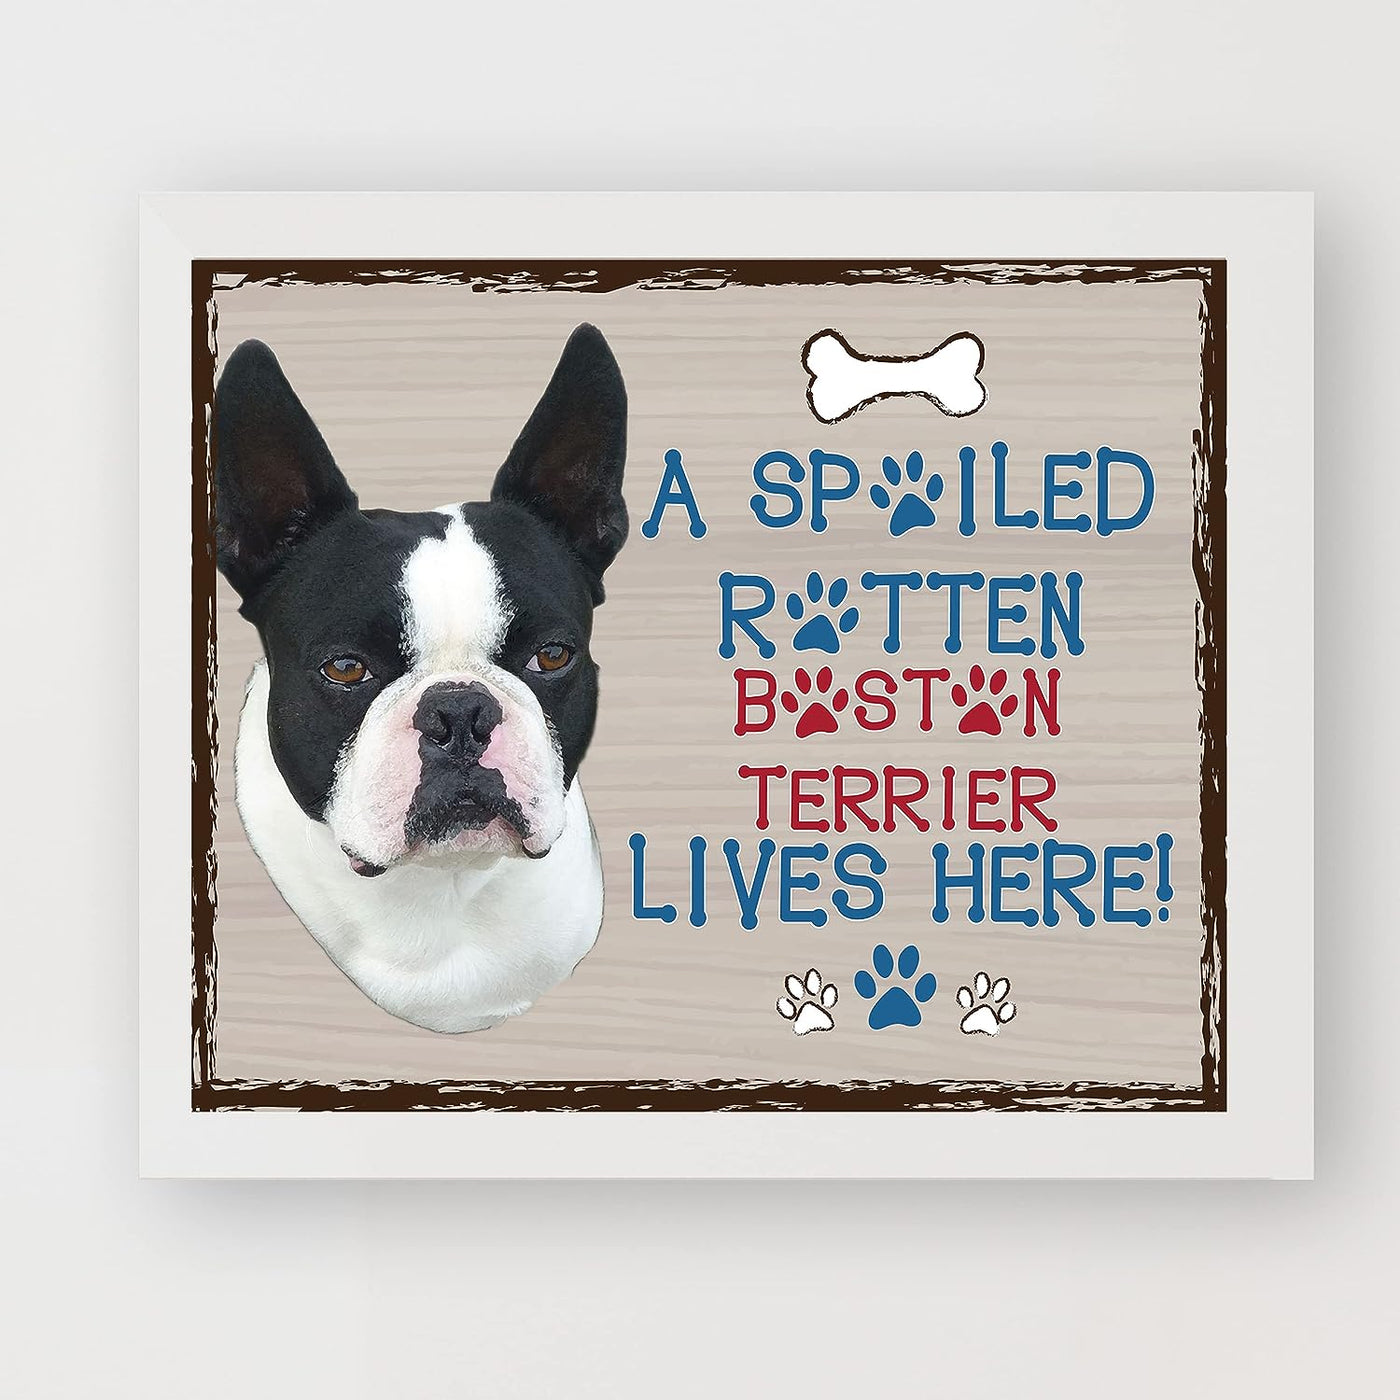 Boston Terrier-Dog Poster Print-10 x 8" Wall Decor Sign-Ready To Frame."A Spoiled Rotten Boston Terrier Lives Here". Perfect Pet Wall Art for Home-Kitchen-Cave-Garage. Great Gift for Terrier Lovers!